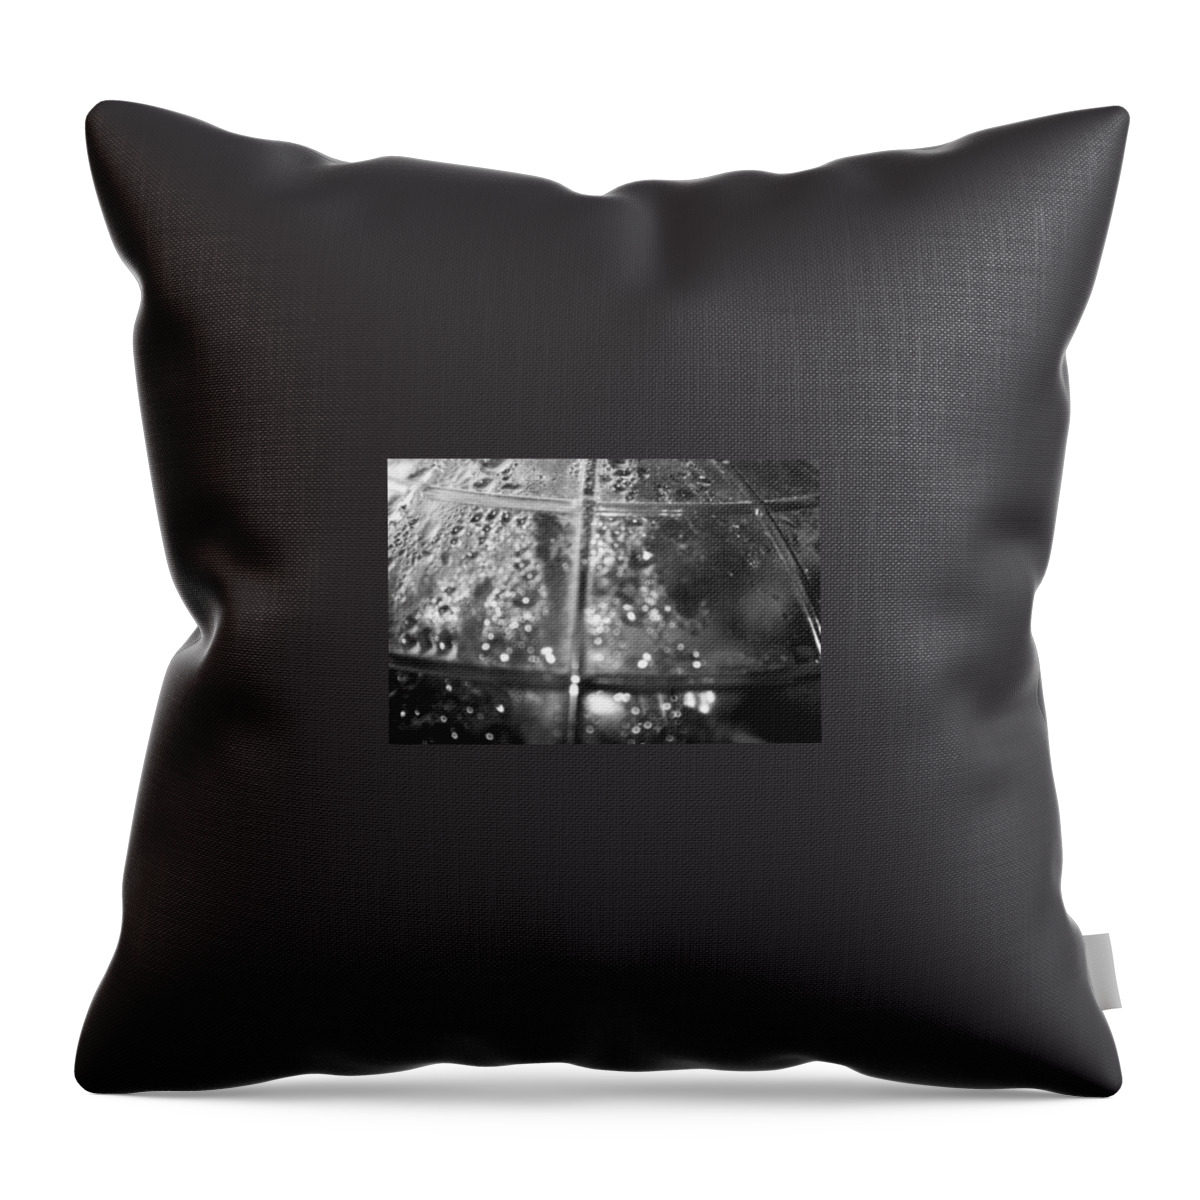 Water Throw Pillow featuring the photograph Condensate by Samantha Lusby